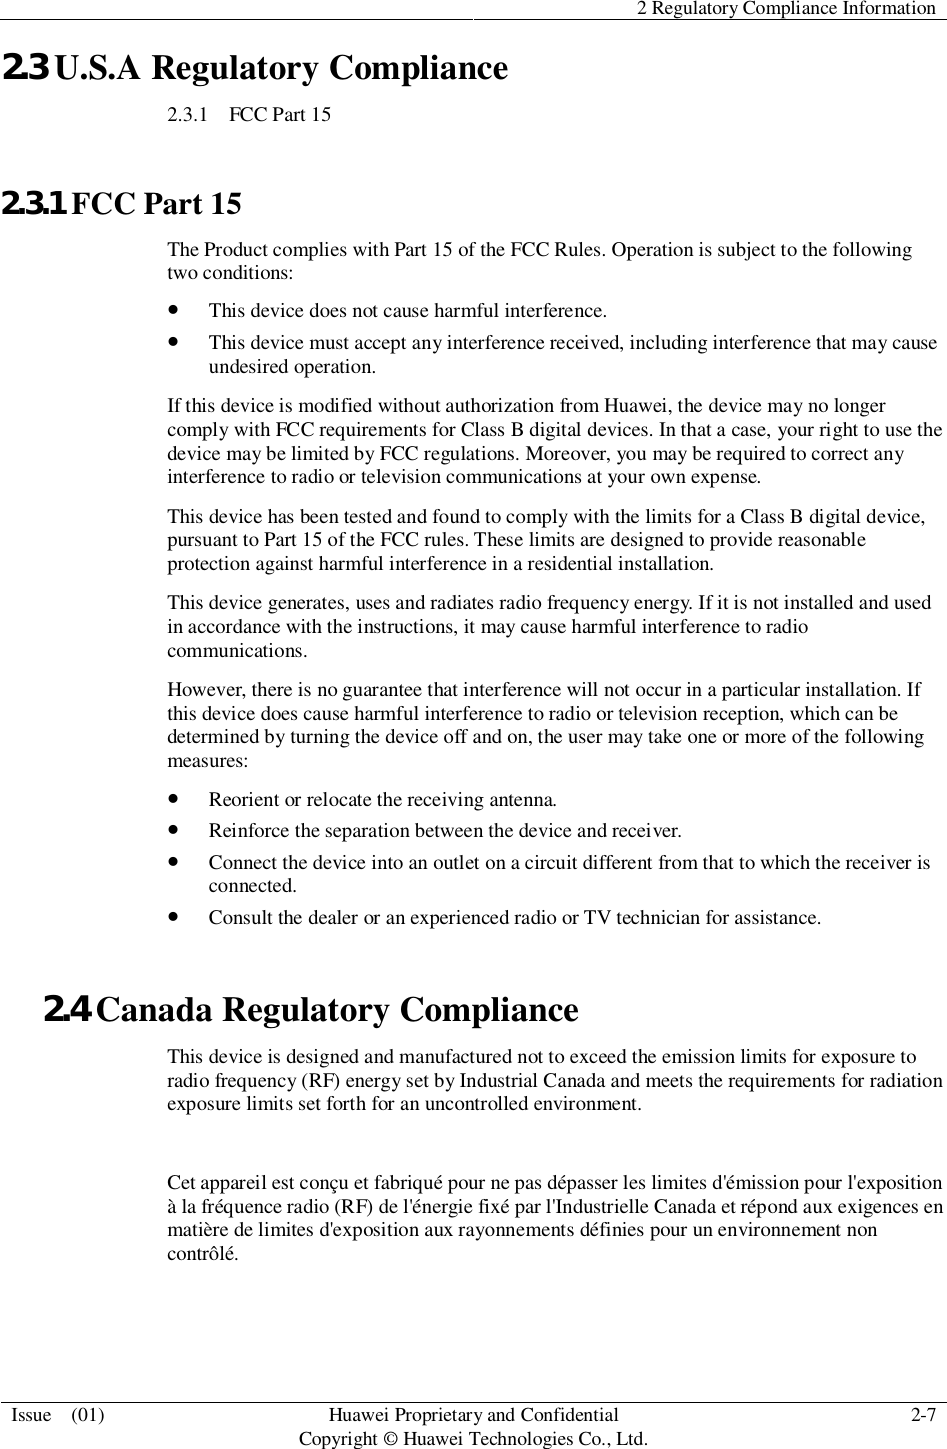 2 Regulatory Compliance InformationIssue  (01) HuaweiProprietary and ConfidentialCopyright © Huawei Technologies Co., Ltd. 2-72.3 U.S.A Regulatory Compliance2.3.1   FCC Part 152.3.1 FCC Part 15The Product complies with Part 15 of the FCC Rules. Operation is subject to the followingtwo conditions:This device does not cause harmful interference.This device must accept any interference received, including interference that may causeundesired operation.If this device is modified without authorization from Huawei, the device may no longercomply with FCC requirements for Class B digital devices. In that a case, your right to use thedevice may be limited by FCC regulations. Moreover, you may be required to correct anyinterference to radio or television communications at your own expense.This device has been tested and found to comply with the limits for a Class B digital device,pursuant to Part 15 of the FCC rules. These limits are designed to provide reasonableprotection against harmful interference in a residential installation.This device generates, uses and radiates radio frequency energy. If it is not installed and usedin accordance with the instructions, it may cause harmful interference to radiocommunications.However, there is no guarantee that interference will not occur in a particular installation. Ifthis device does cause harmful interference to radio or television reception, which can bedetermined by turning the device off and on, the user may take one or more of the followingmeasures:Reorient or relocate the receiving antenna.Reinforce the separation between the device and receiver.Connect the device into an outlet on a circuit different from that to which the receiver isconnected.Consult the dealer or an experienced radio or TV technician for assistance.2.4 Canada Regulatory ComplianceThis device is designed and manufactured not to exceed the emission limits for exposure toradio frequency (RF) energy set by Industrial Canada and meets the requirements for radiationexposure limits set forth for an uncontrolled environment.Cet appareil est conçu et fabriqué pour ne pas dépasser les limites d&apos;émission pour l&apos;expositionà la fréquence radio (RF) de l&apos;énergie fixé par l&apos;Industrielle Canada et répond aux exigences enmatière de limites d&apos;exposition aux rayonnements définies pour un environnement noncontrôlé.